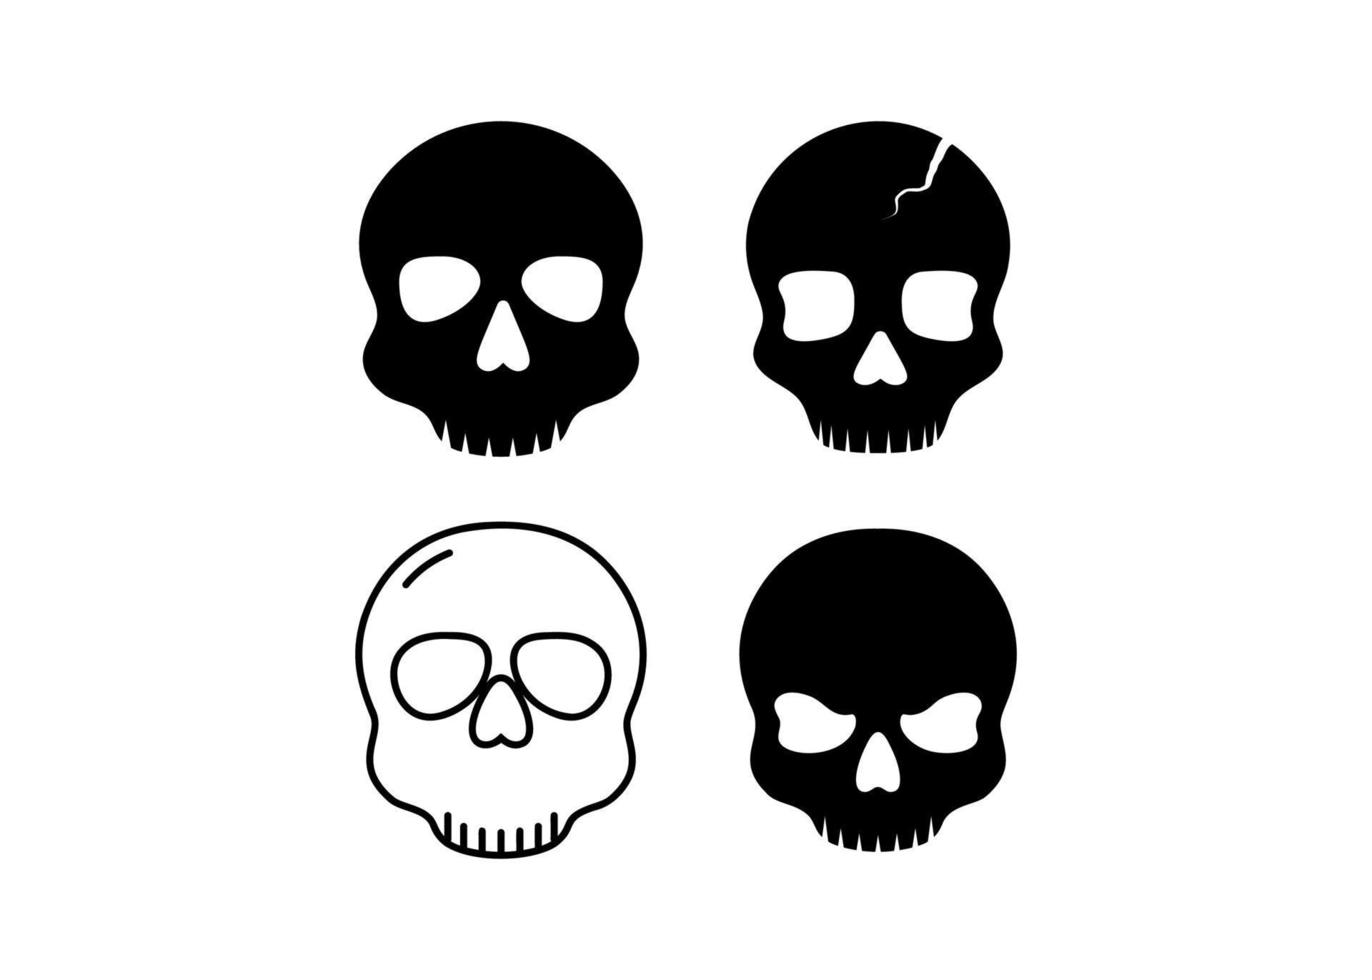 Skull icon design template vector isolated